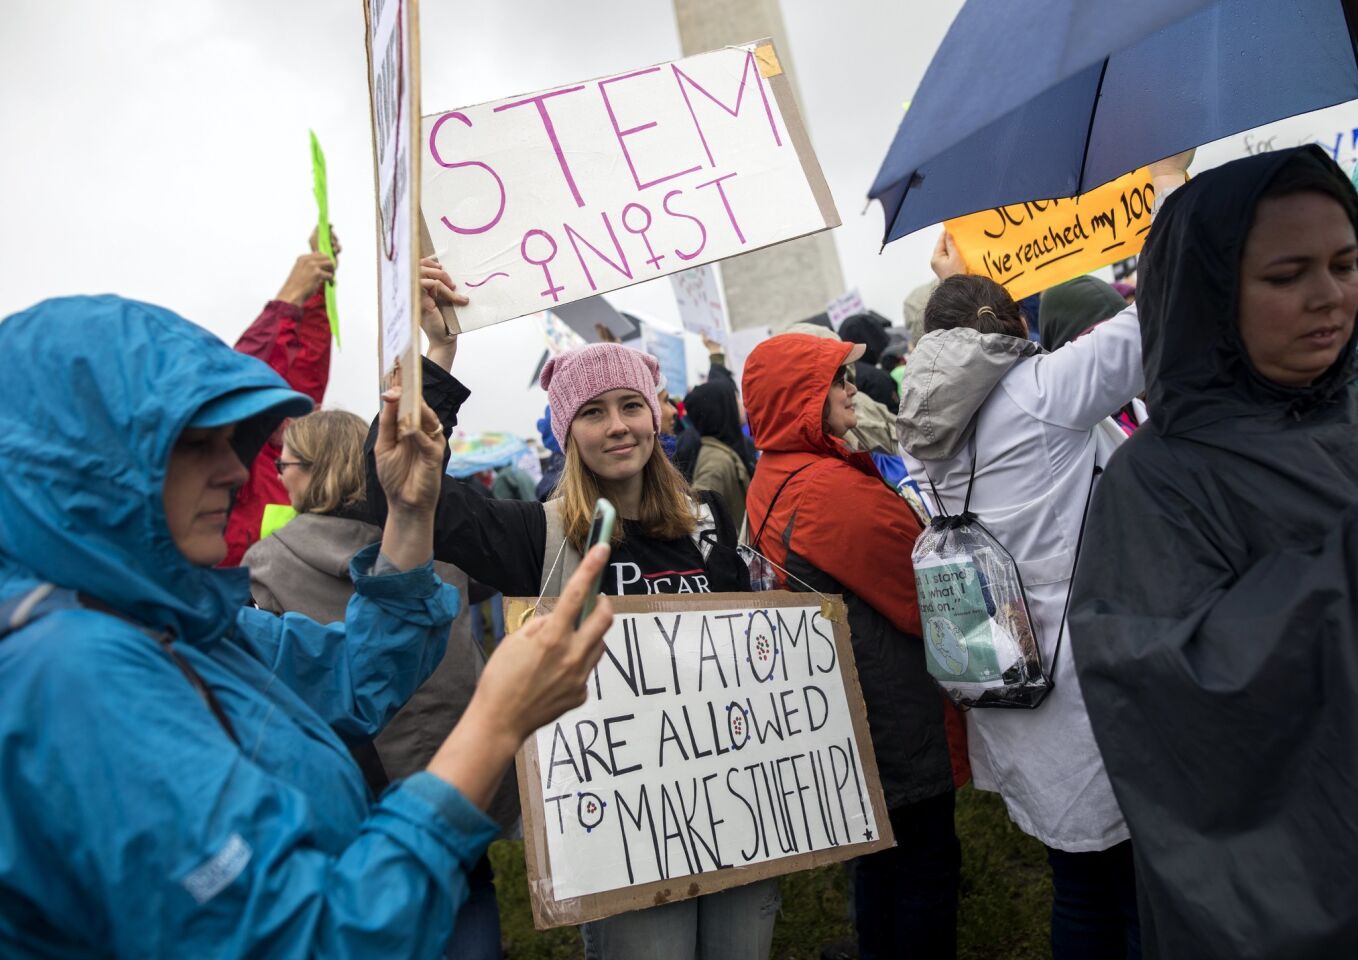 Science fans gather on the National Mall for the March for Science in Washington, D.C.